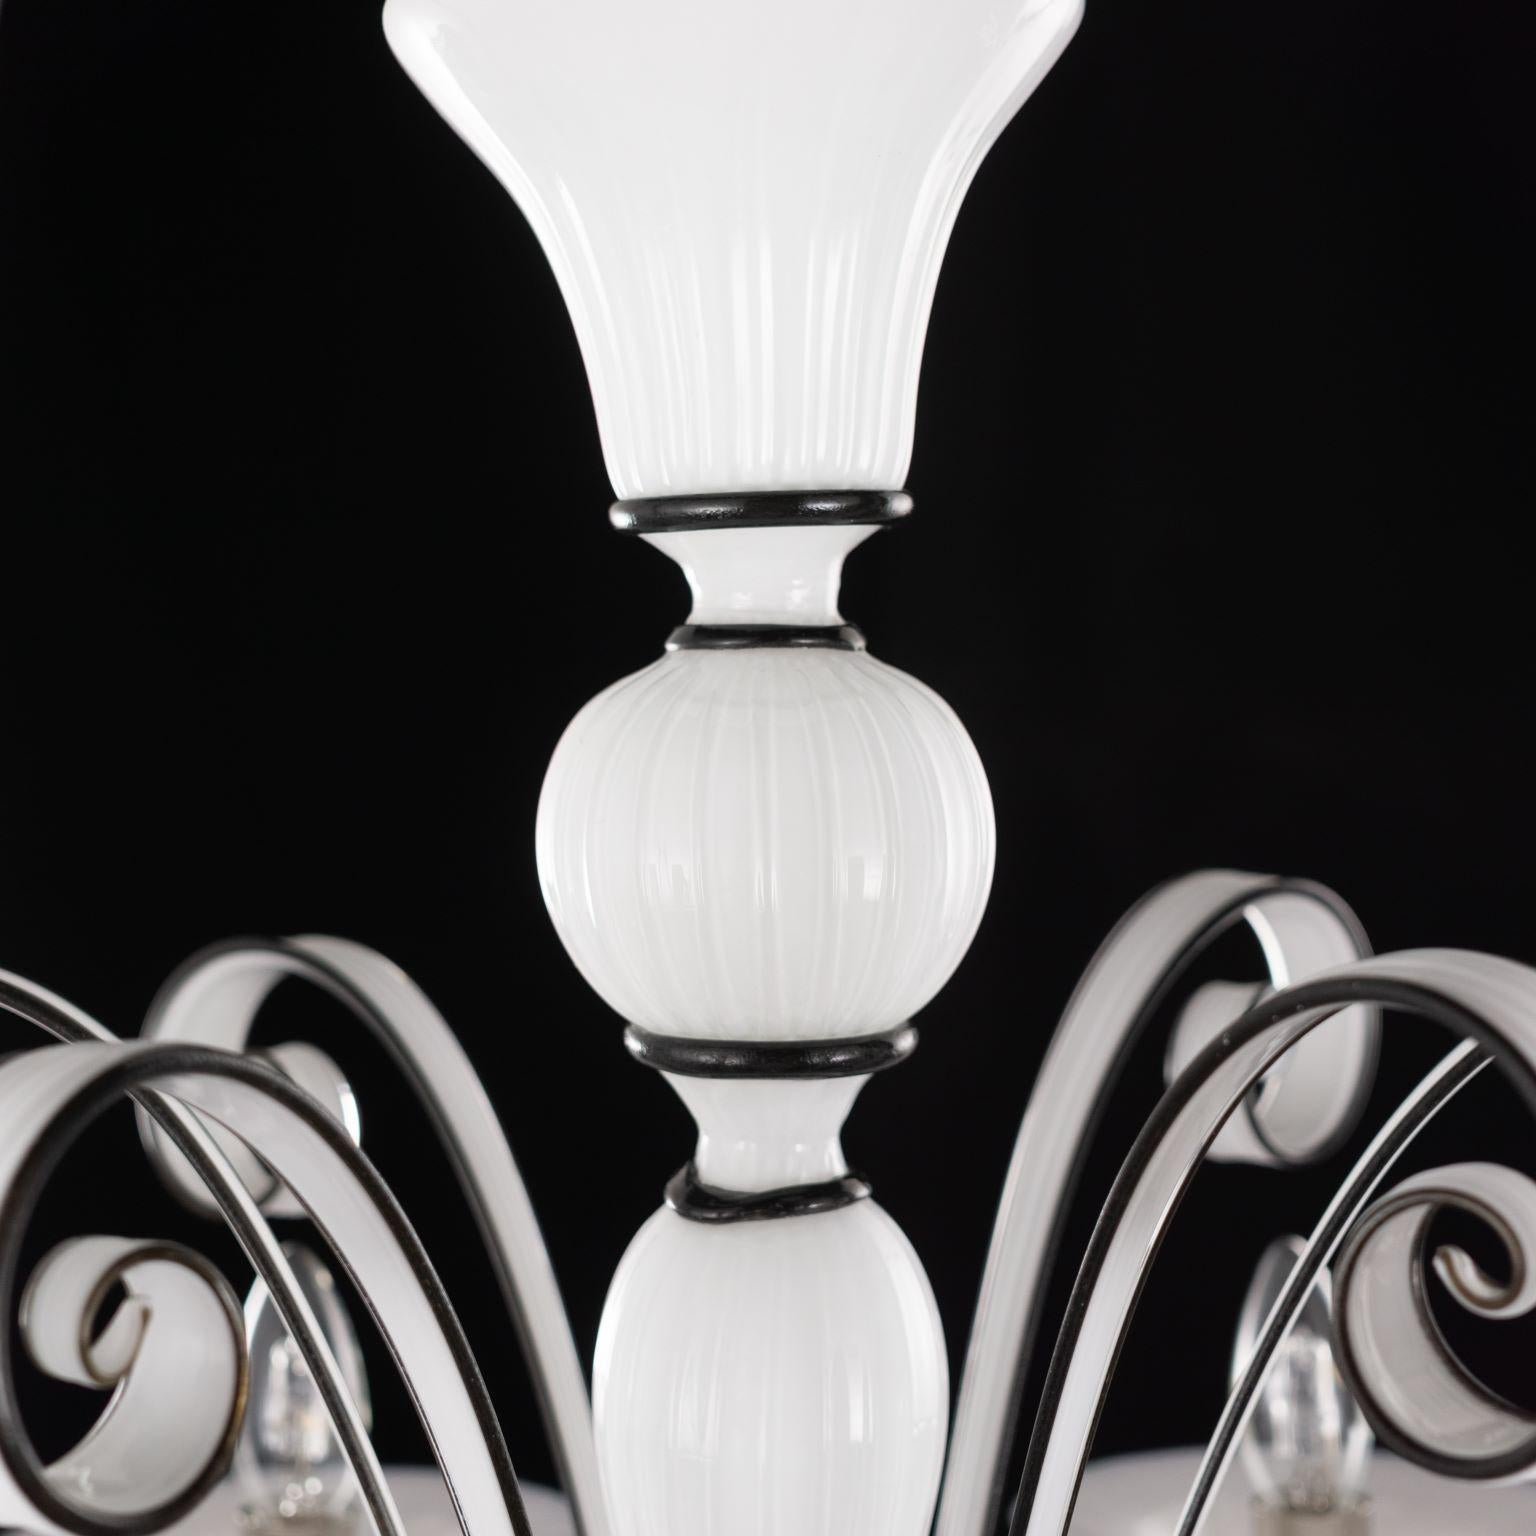 Contemporary Chandelier 5 Arms White Blown Artistic Murano Glass, Black Details by Multiforme For Sale